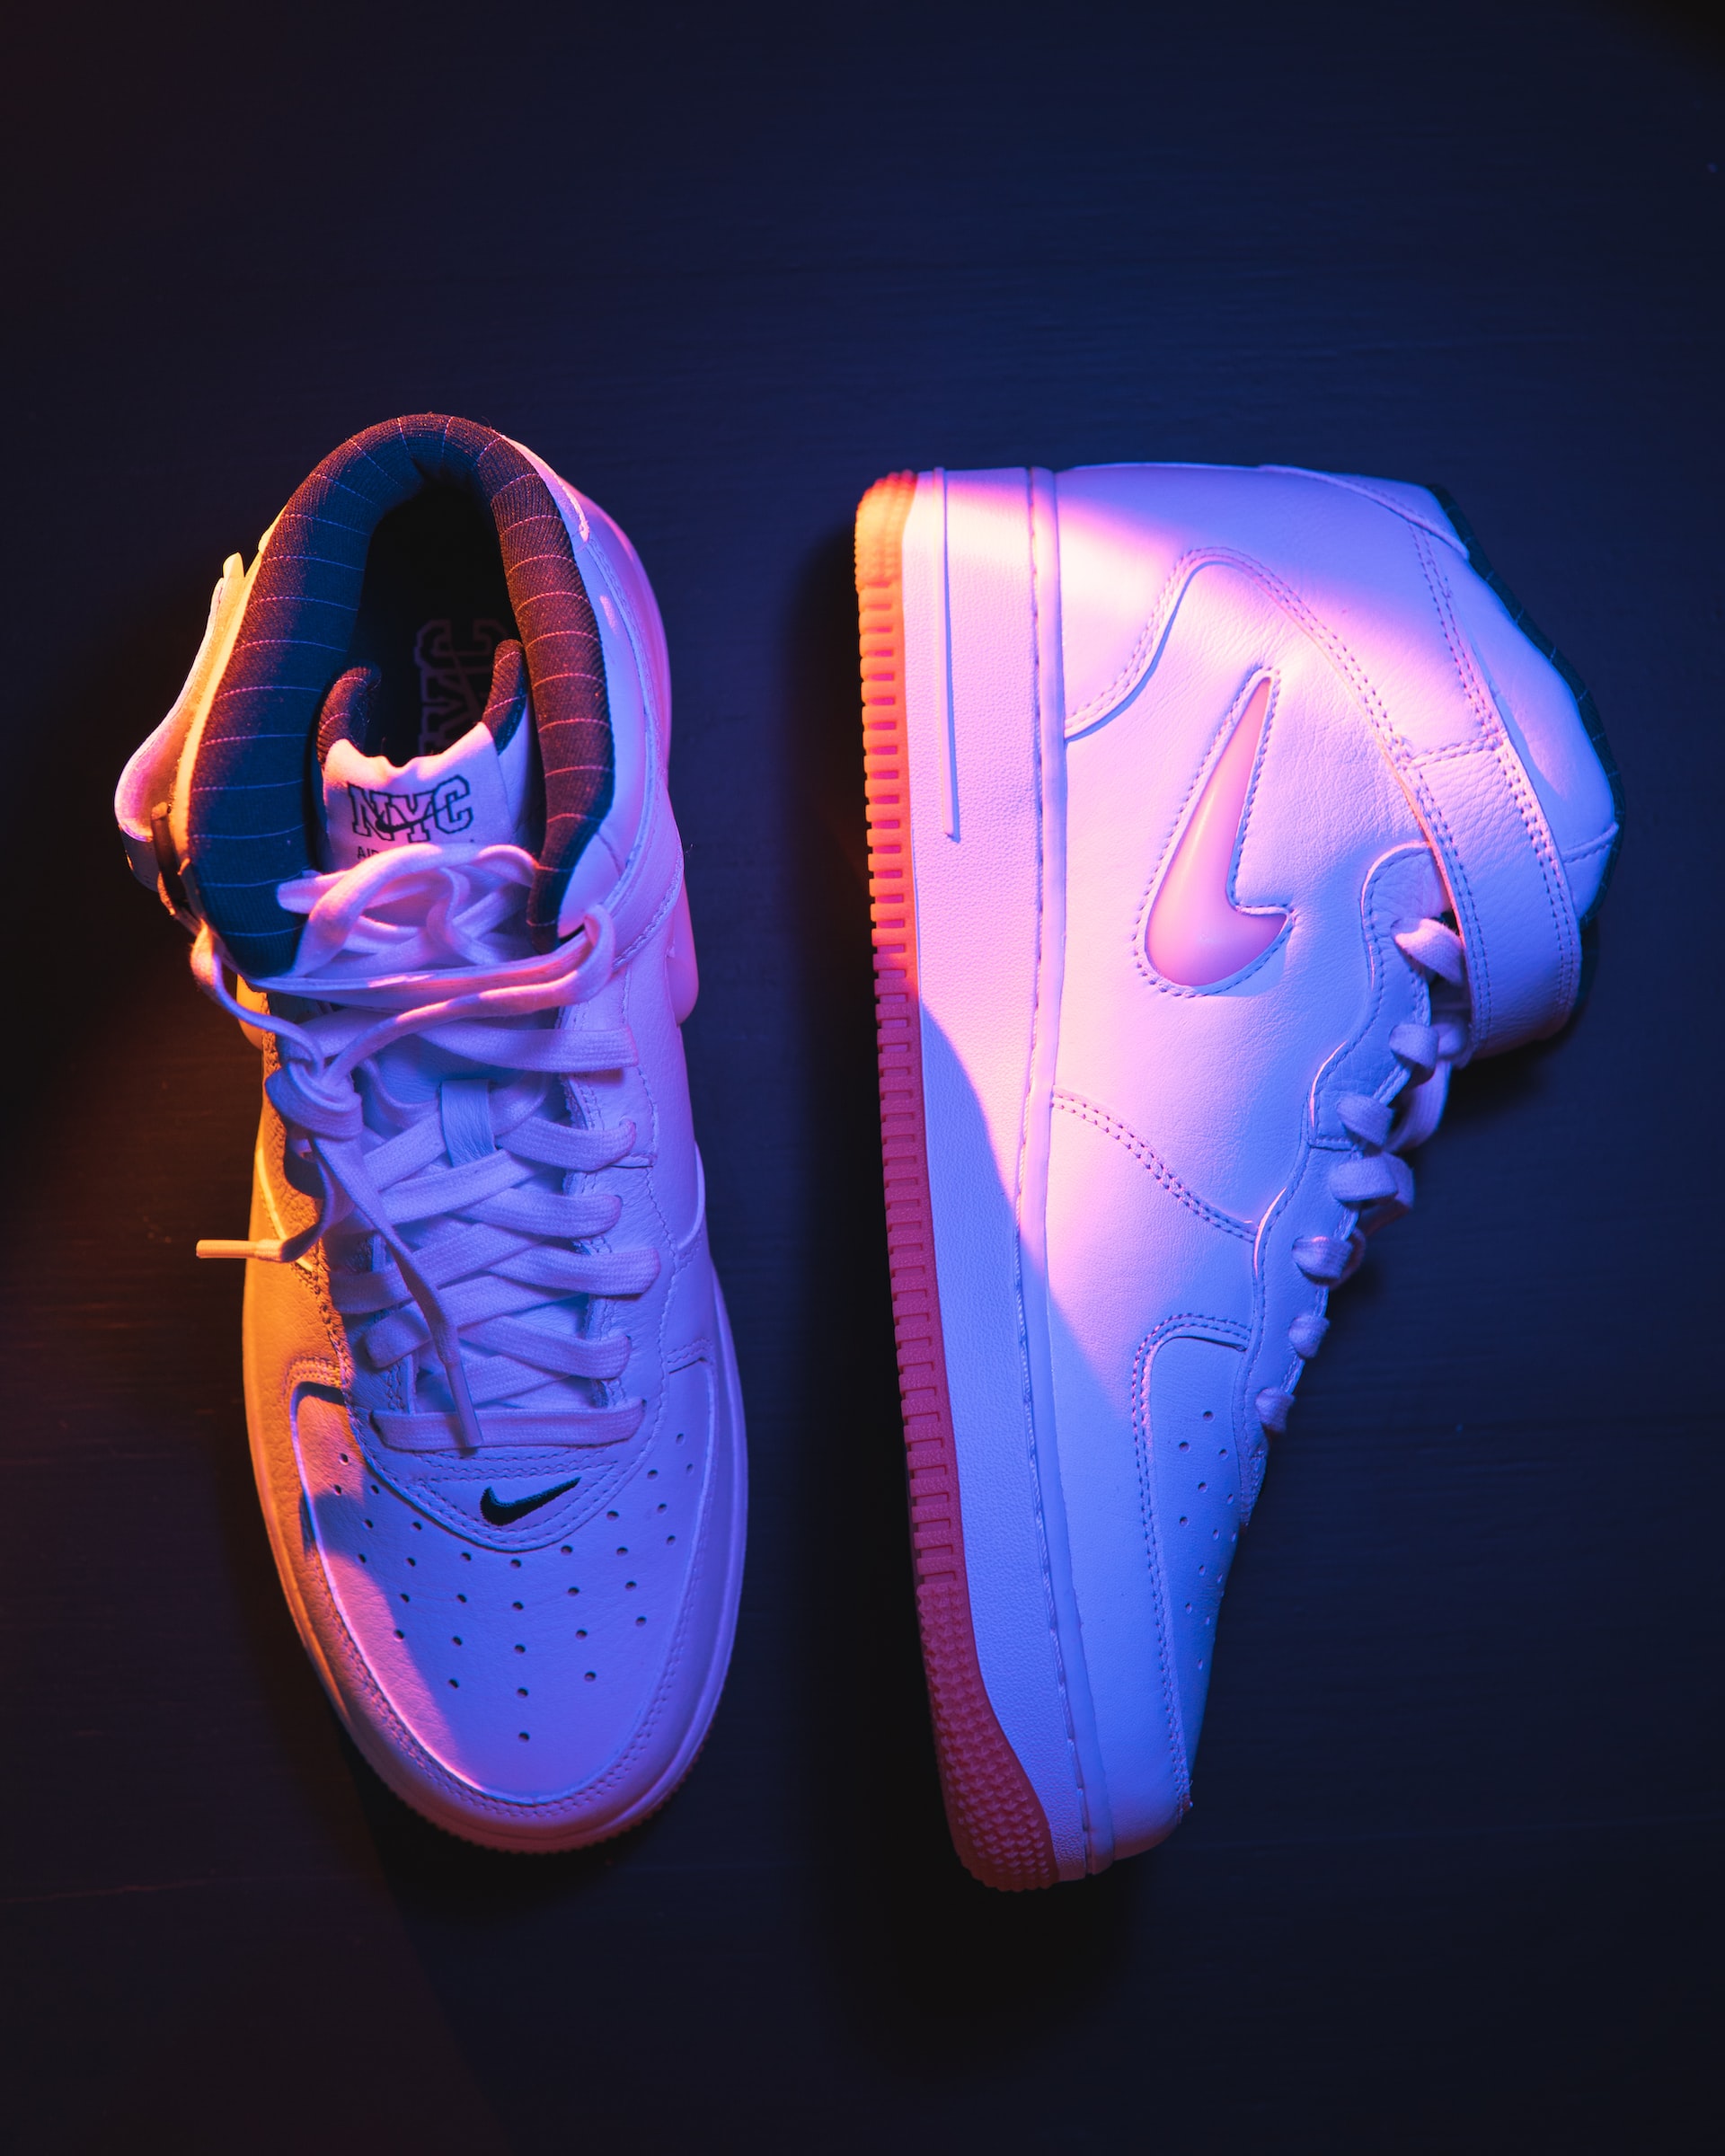 The Nike Air Force 1 Is An Icon Of Hip Hop Culture